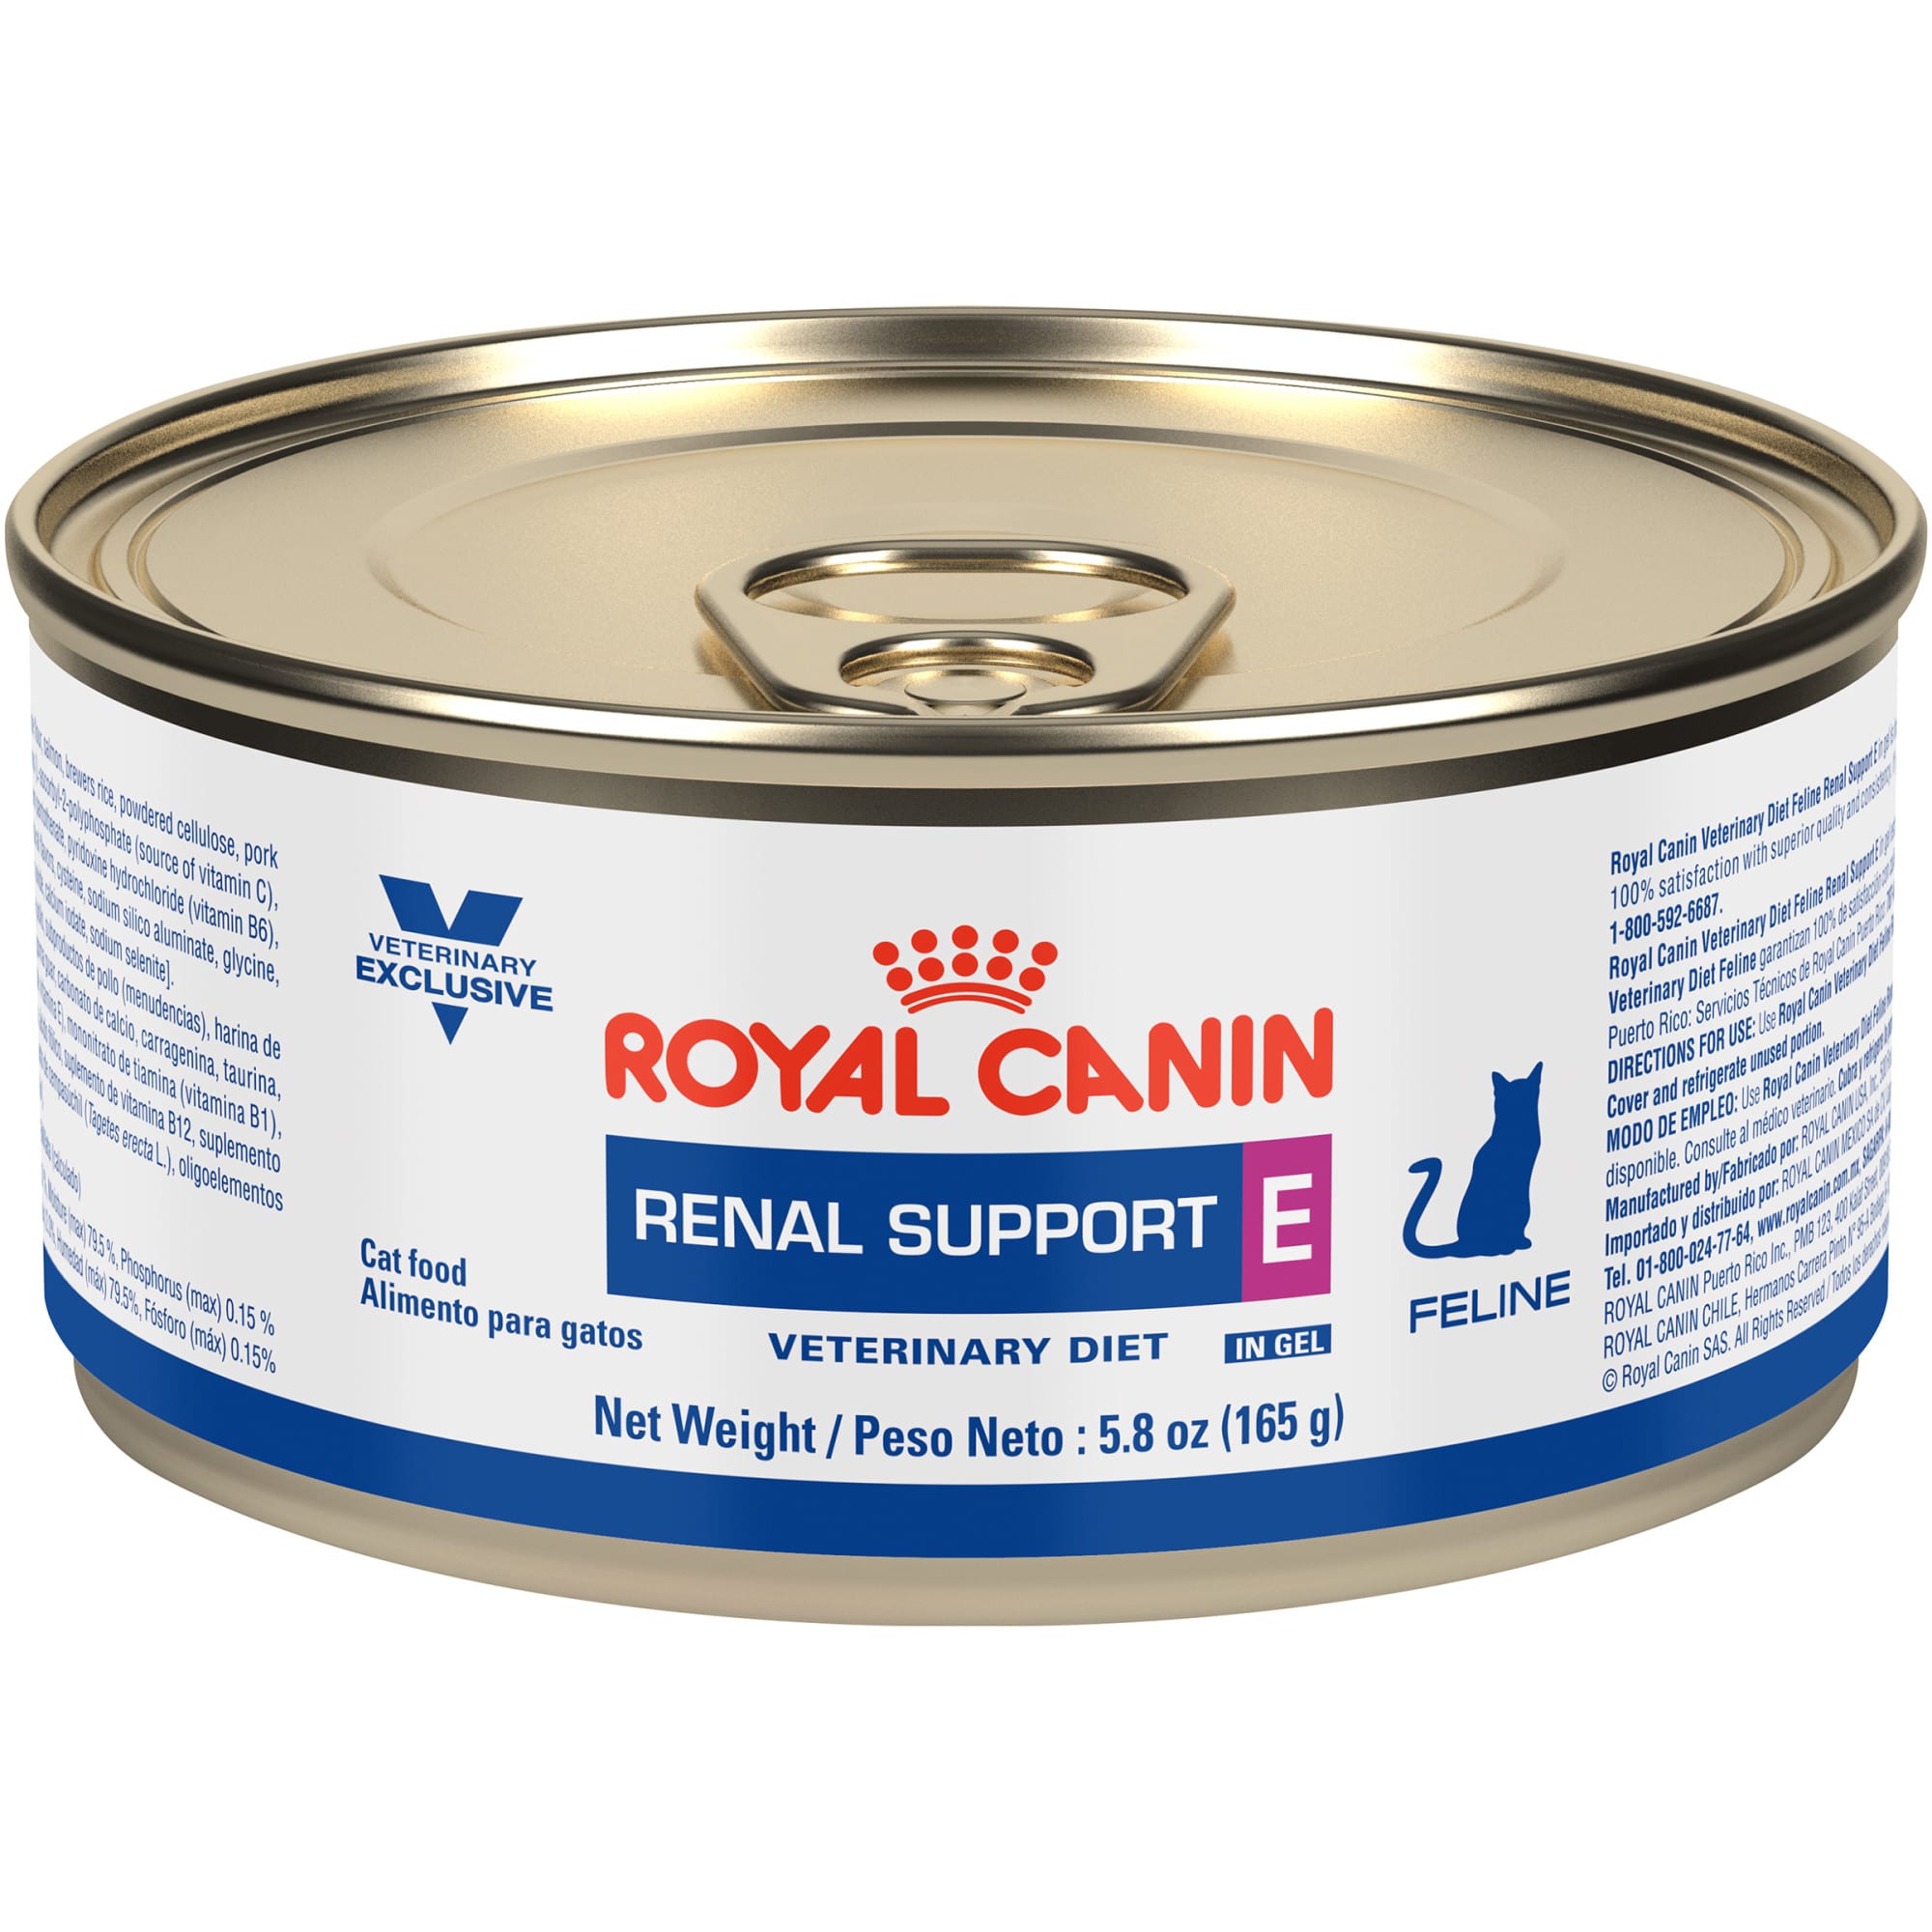 Royal Canin Veterinary Diet Renal Support E Enticing Wet Cat Food 5 8 Oz Case Of 24 Petco